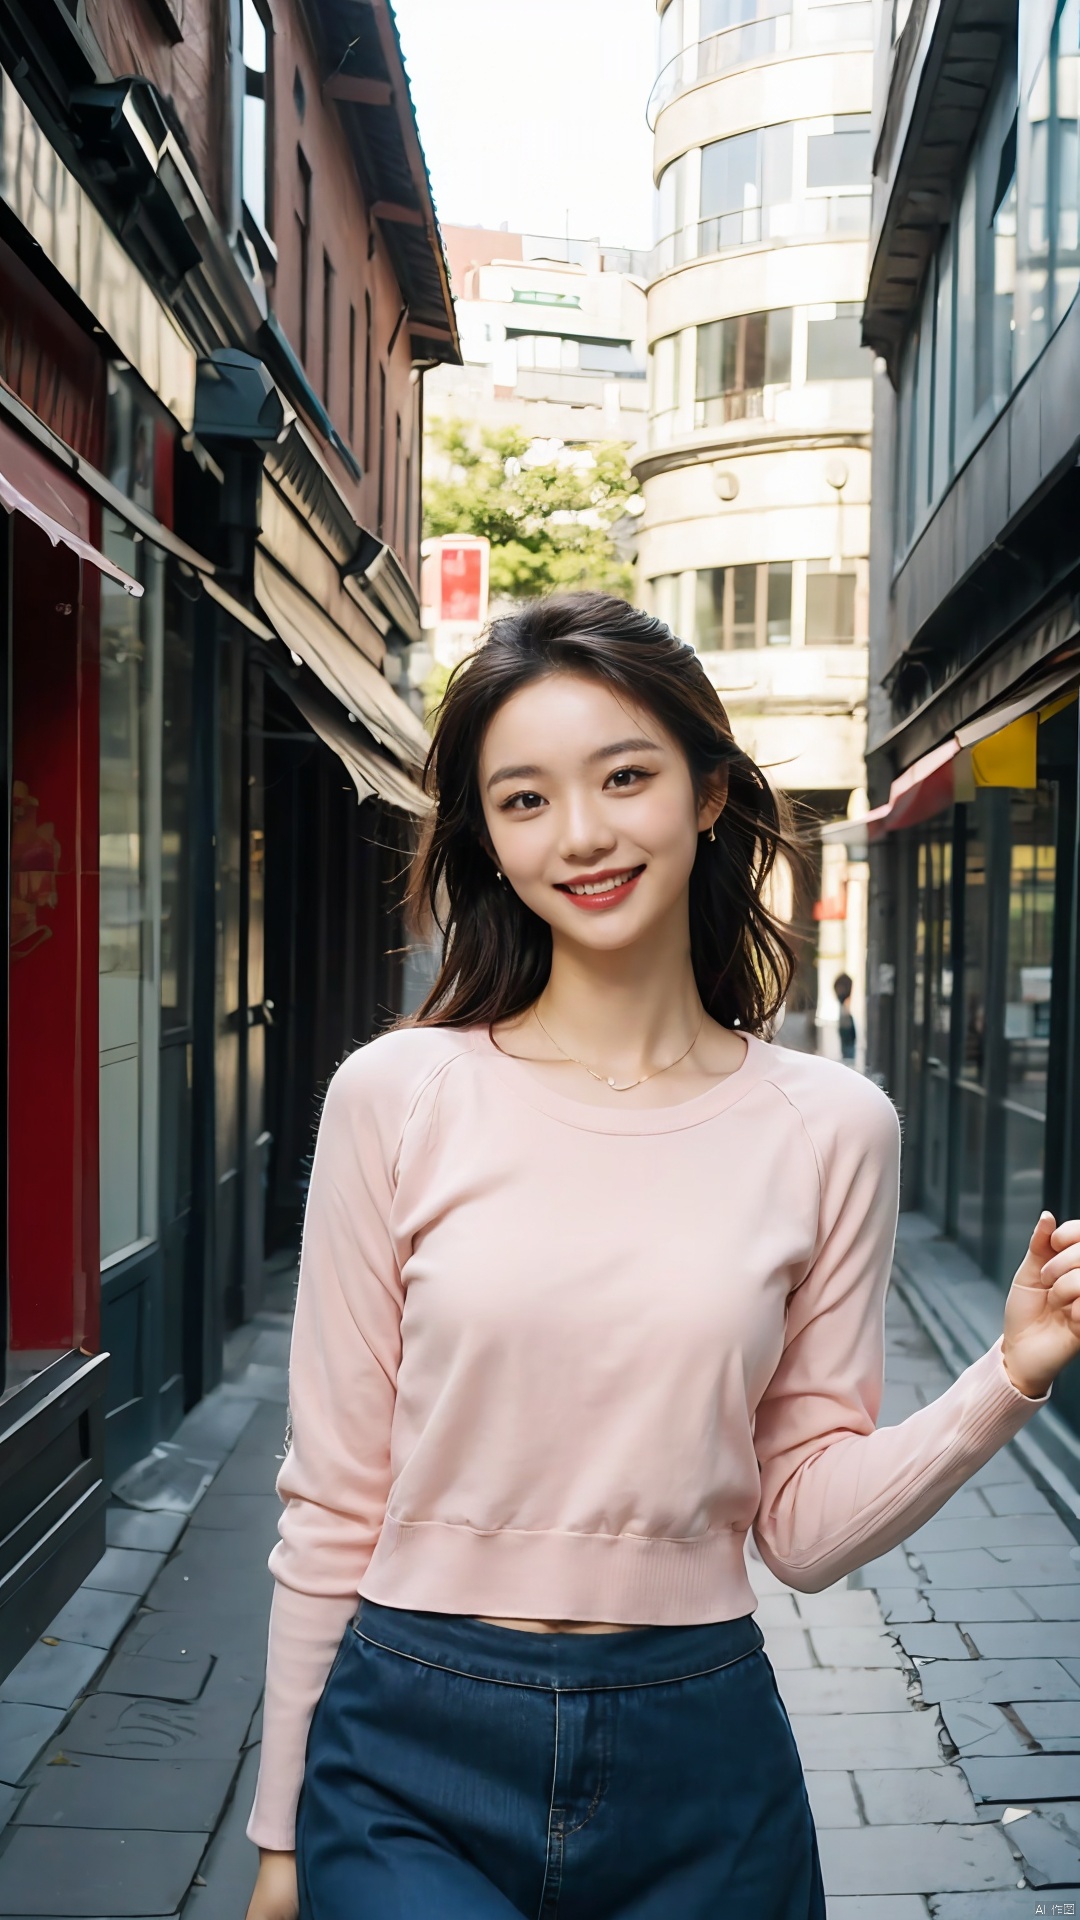  The image features a young woman in a pink top and a blue skirt, standing on a cobbled street with a smile on her face. The sunlight illuminates her face, casting a warm glow on her features. The colors in the image are vibrant and well-balanced, with a natural feel to them. The quality of the image is excellent, with no visible noise or graininess. The street setting adds a sense of depth and context to the scene. The young woman's cheerful and confident demeanor is captured in the image.